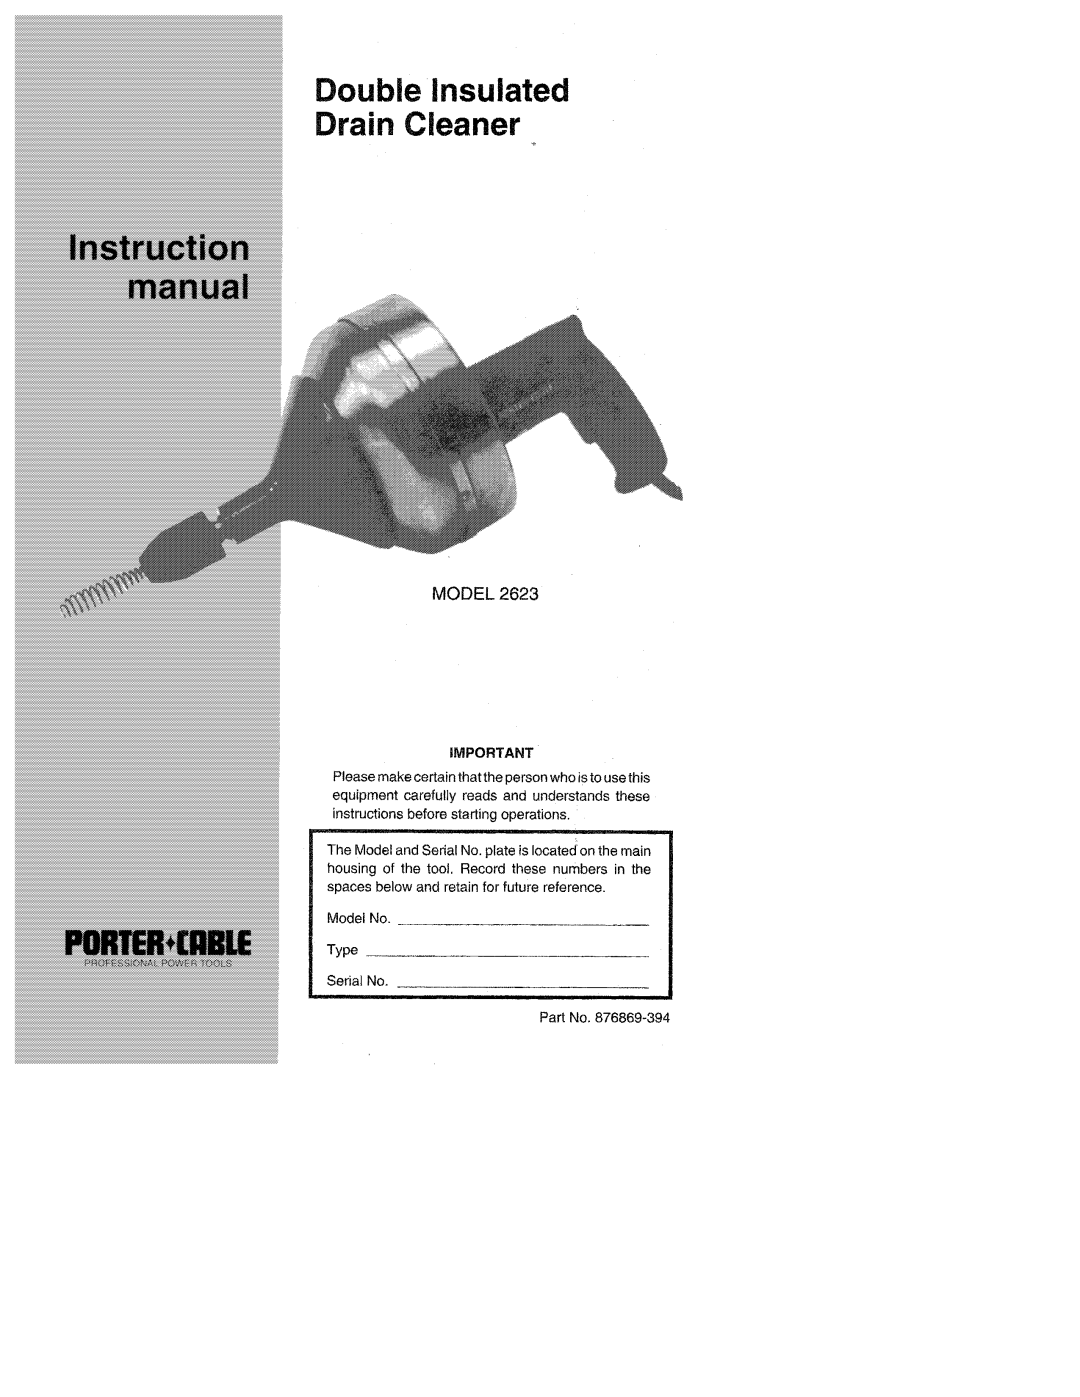 Porter-Cable 2623 manual 